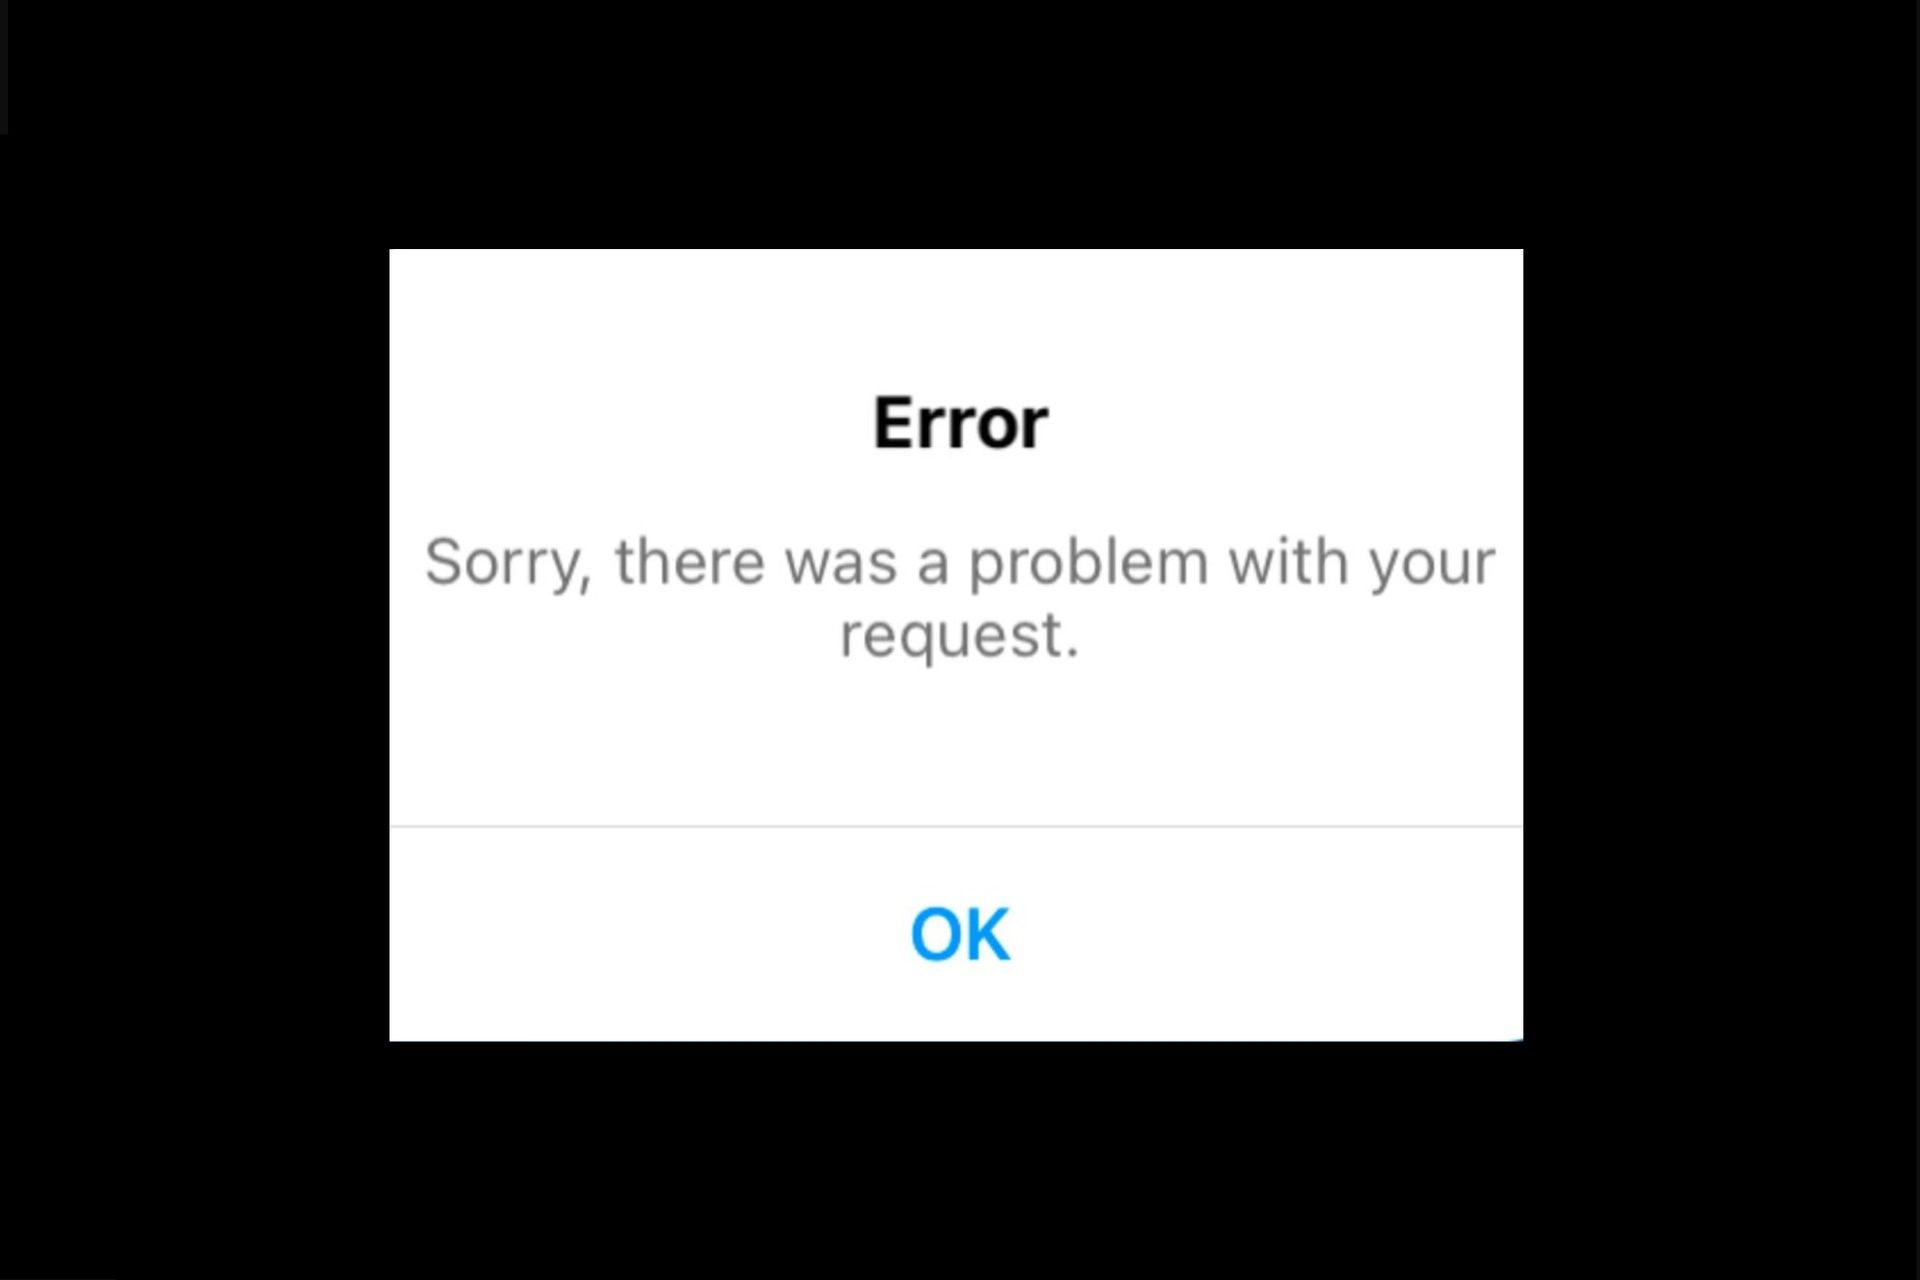 Today we are going to show you how to reactivate Instagram. Are you receiving an “Sorry there was a problem with your request” message when you try to log in to Instagram? Many Instagram users have been getting this error since 2018, and it continues to exist today.